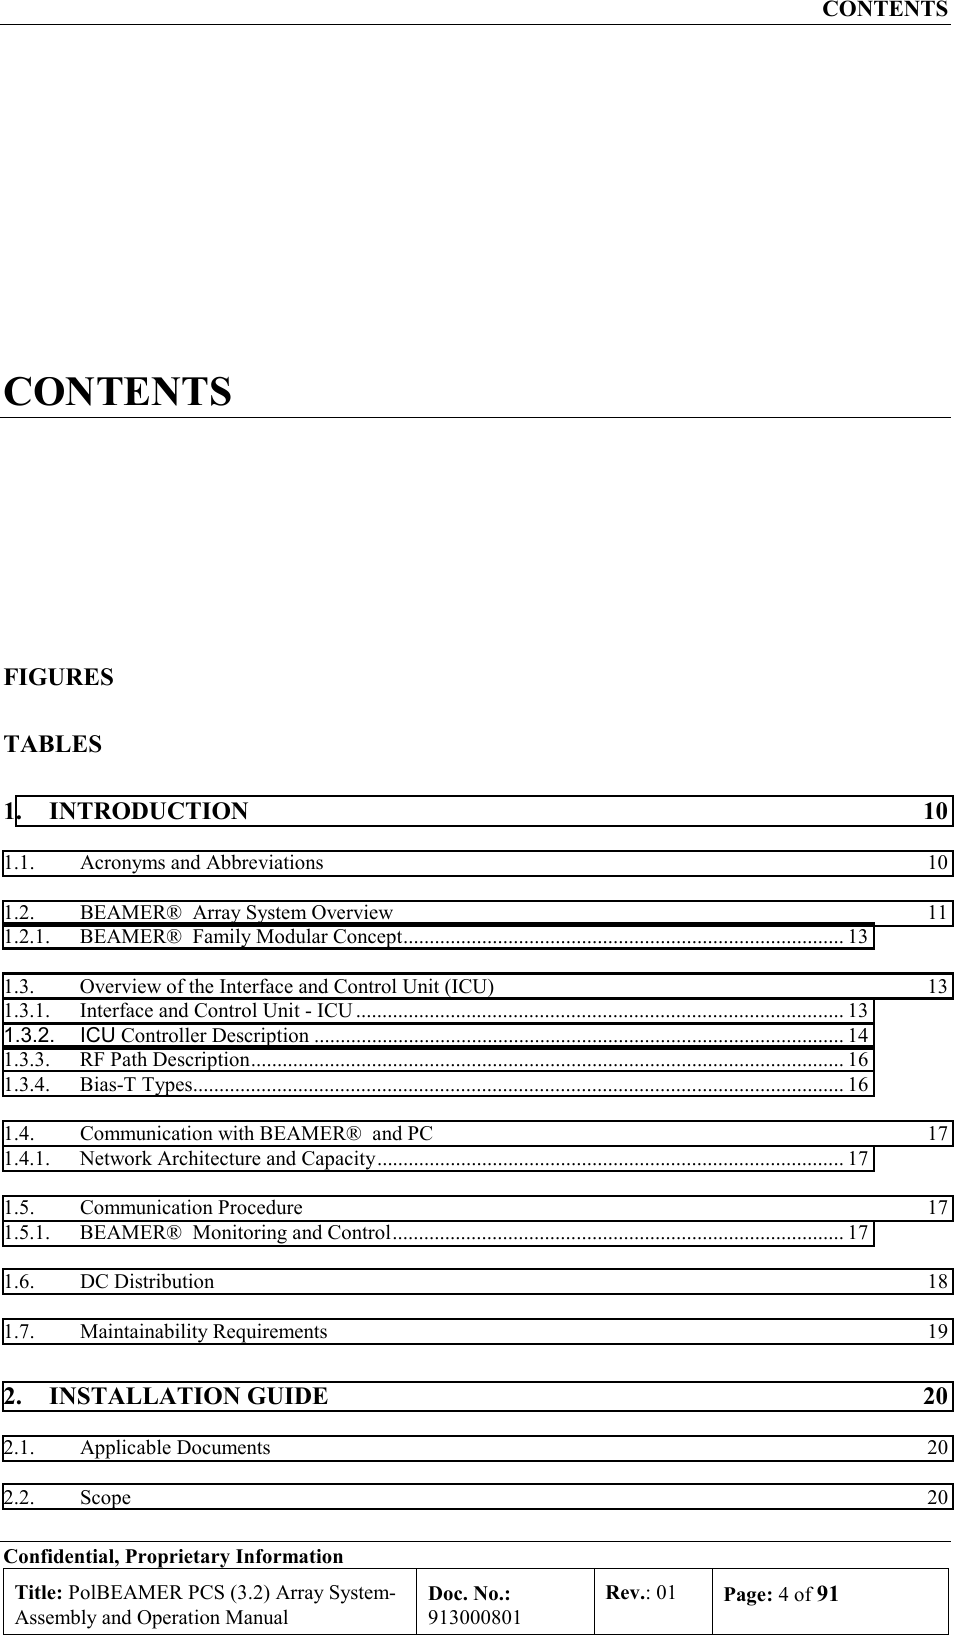 CONTENTS Confidential, Proprietary Information Title: PolBEAMER PCS (3.2) Array System- Assembly and Operation Manual Doc. No.: 913000801 Rev.: 01  Page: 4 of 91  CONTENTS FIGURES TABLES 1. INTRODUCTION  10 1.1.  Acronyms and Abbreviations  10 1.2.  BEAMER®  Array System Overview  11 1.2.1.  BEAMER®  Family Modular Concept.................................................................................... 13 1.3.  Overview of the Interface and Control Unit (ICU)  13 1.3.1.  Interface and Control Unit - ICU ............................................................................................. 13 1.3.2. ICU Controller Description ..................................................................................................... 14 1.3.3.  RF Path Description................................................................................................................. 16 1.3.4. Bias-T Types............................................................................................................................ 16 1.4.  Communication with BEAMER®  and PC  17 1.4.1.  Network Architecture and Capacity......................................................................................... 17 1.5. Communication Procedure  17 1.5.1.  BEAMER®  Monitoring and Control...................................................................................... 17 1.6. DC Distribution  18 1.7. Maintainability Requirements  19 2. INSTALLATION GUIDE  20 2.1. Applicable Documents  20 2.2. Scope  20 